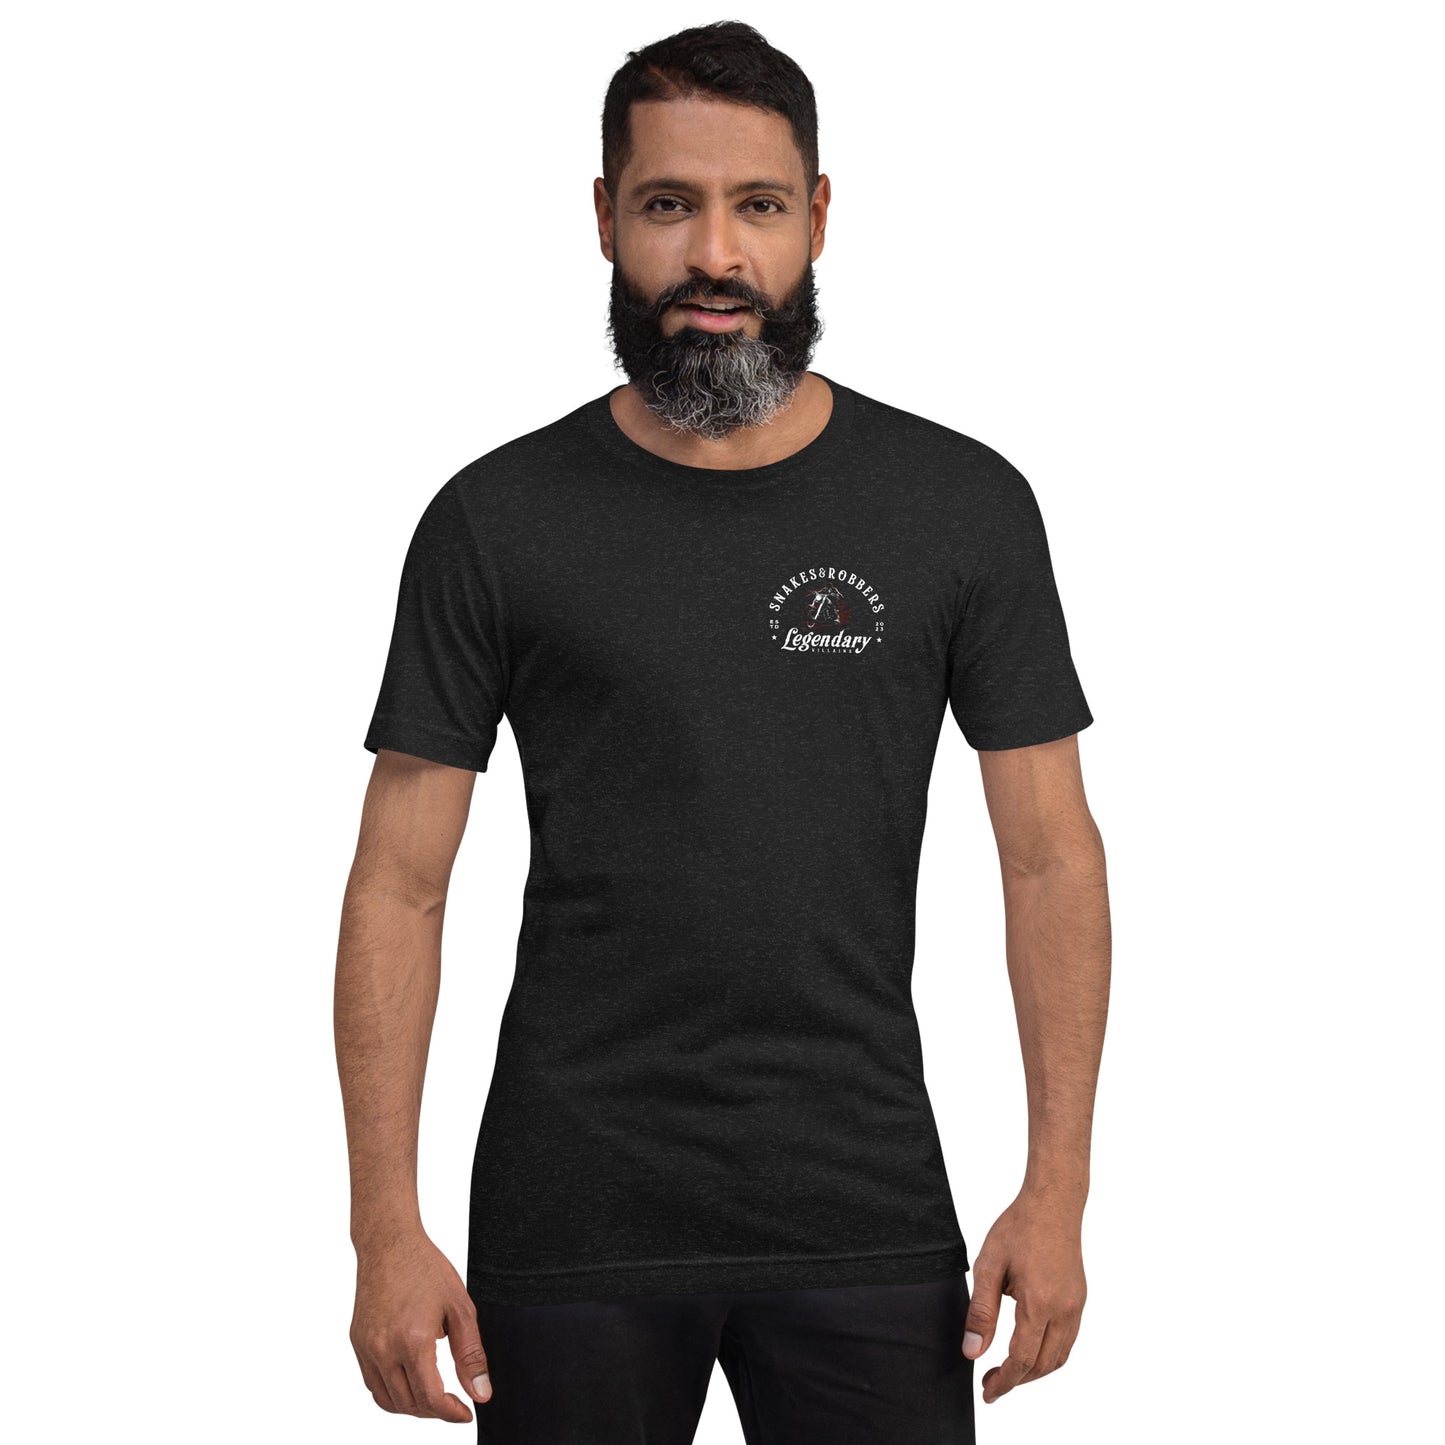 Wraith Riders Full Back Retail Fit T-Shirt